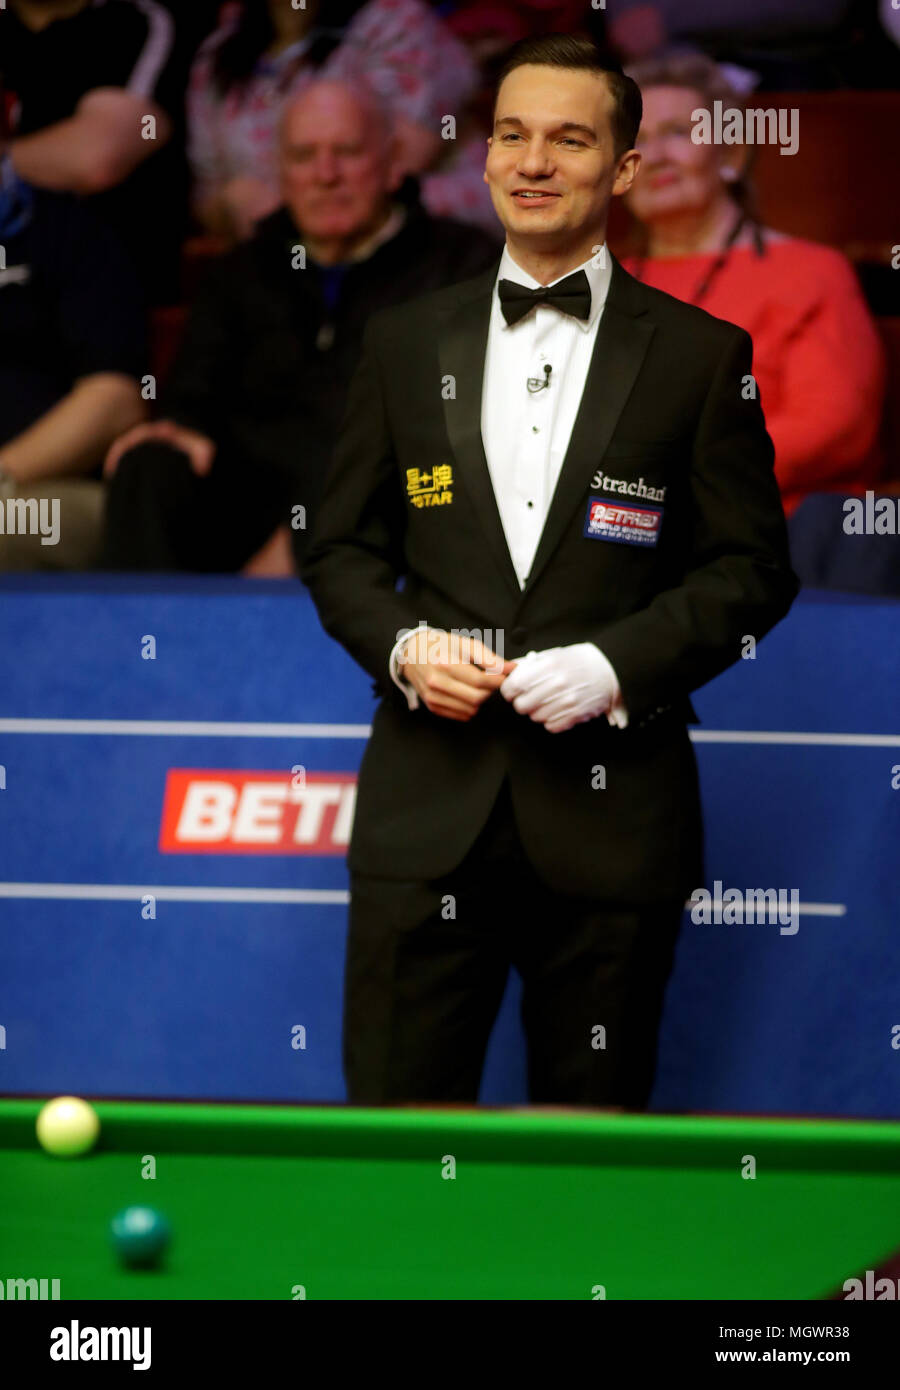 Snooker Referee High Resolution Stock Photography and Images - Alamy